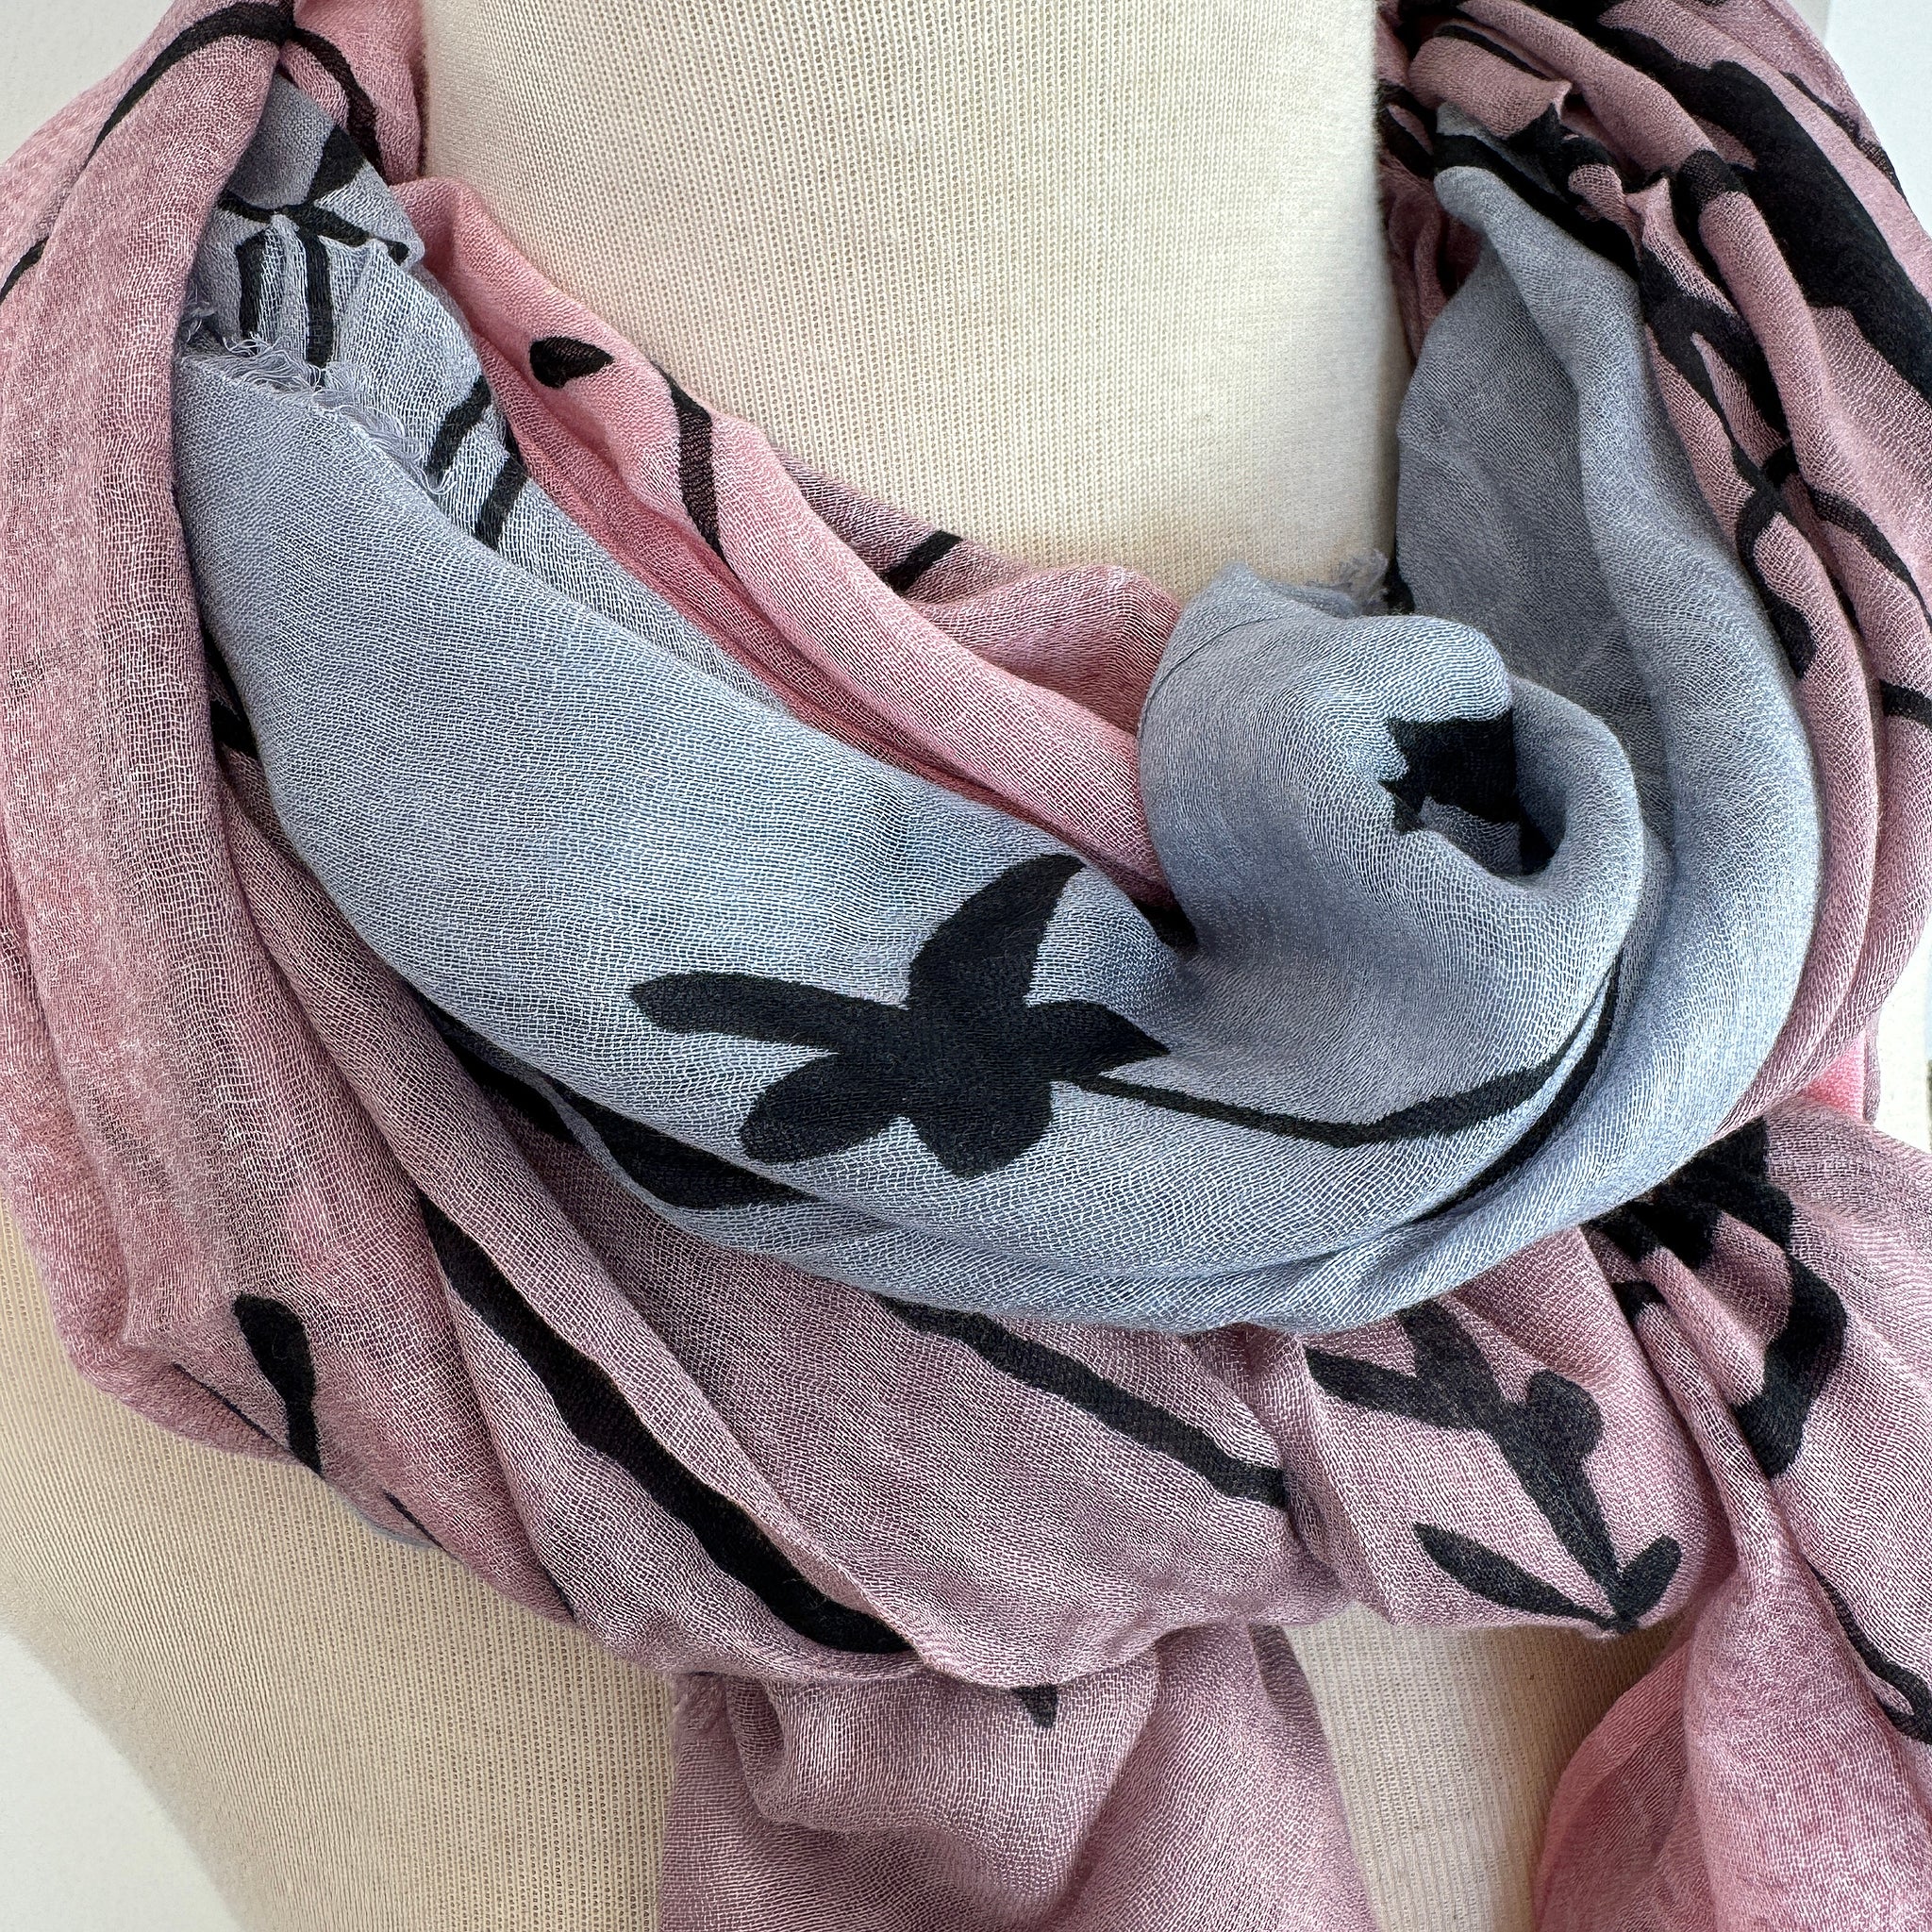 Blue Pacific Tree Print Cashmere and Silk Scarf in Rose Pink and Silver Gray